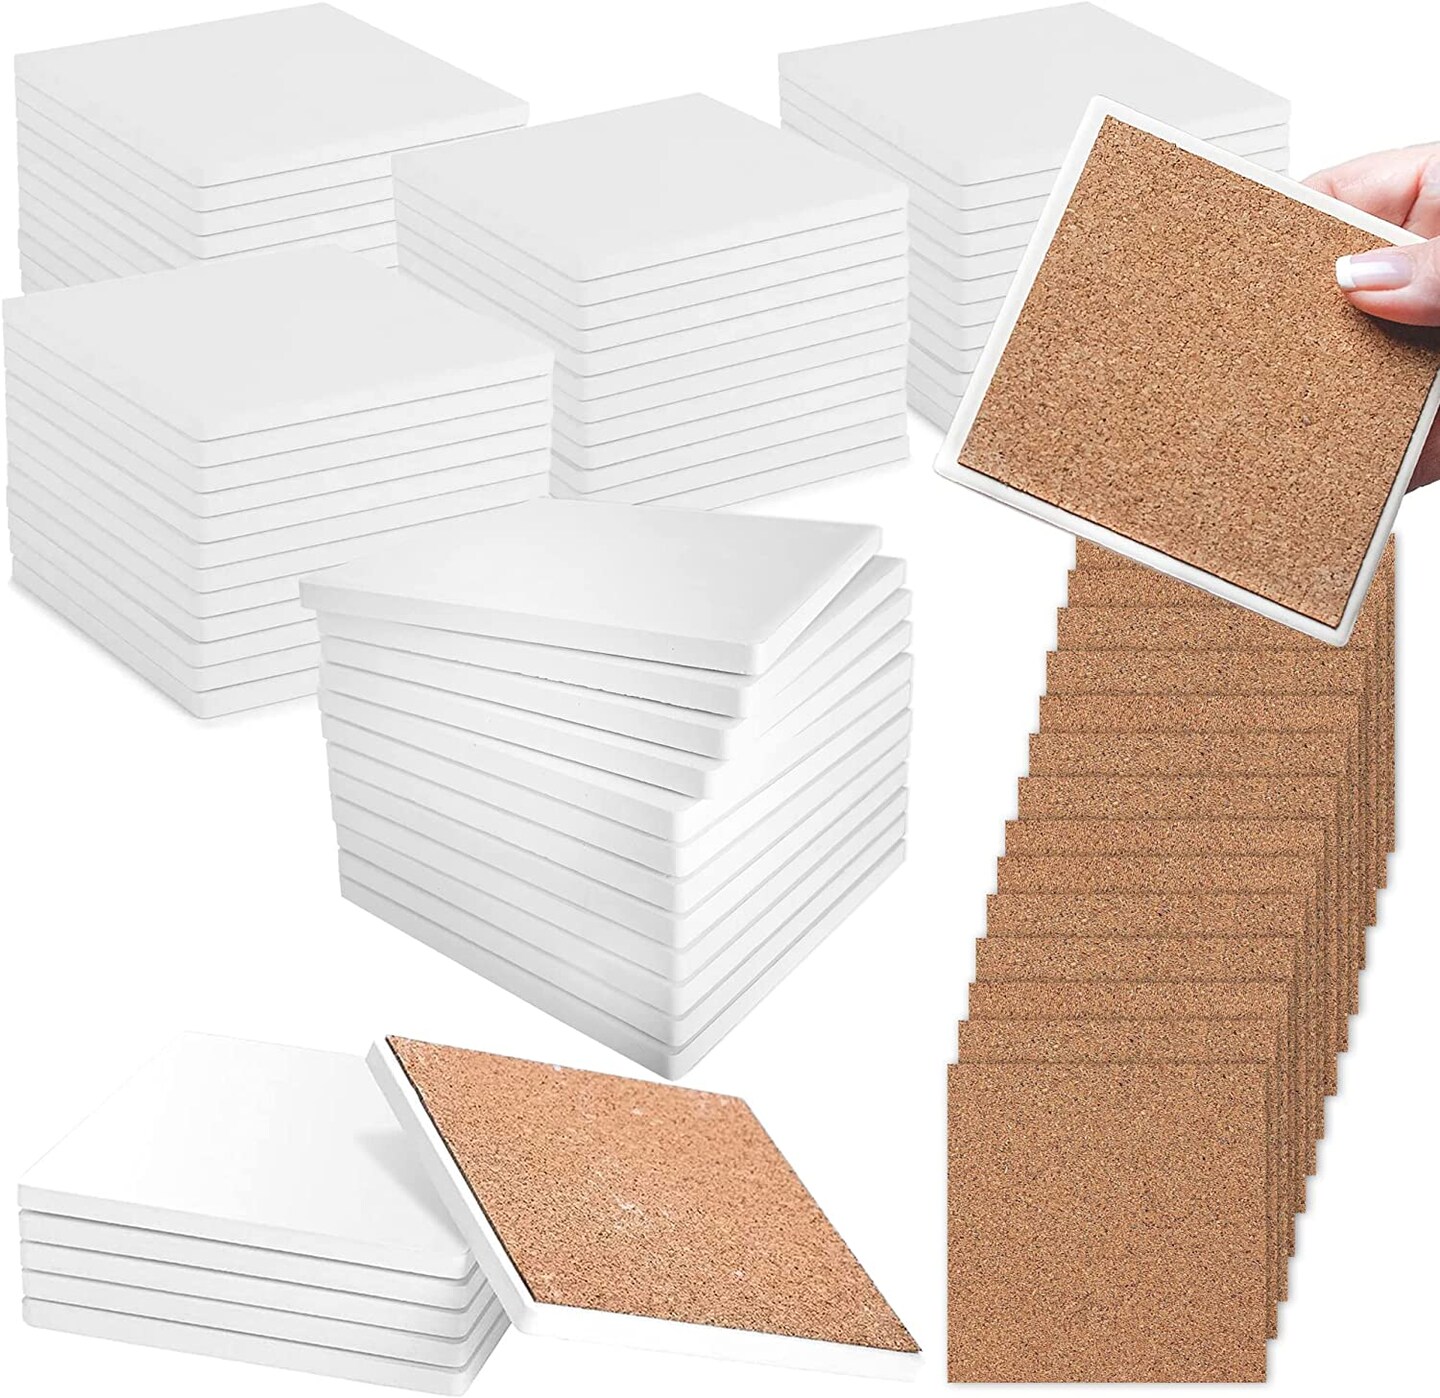 Pixiss 100 Pack Square Ceramic White Tiles Unglazed 4x4 with Cork Backing Pads